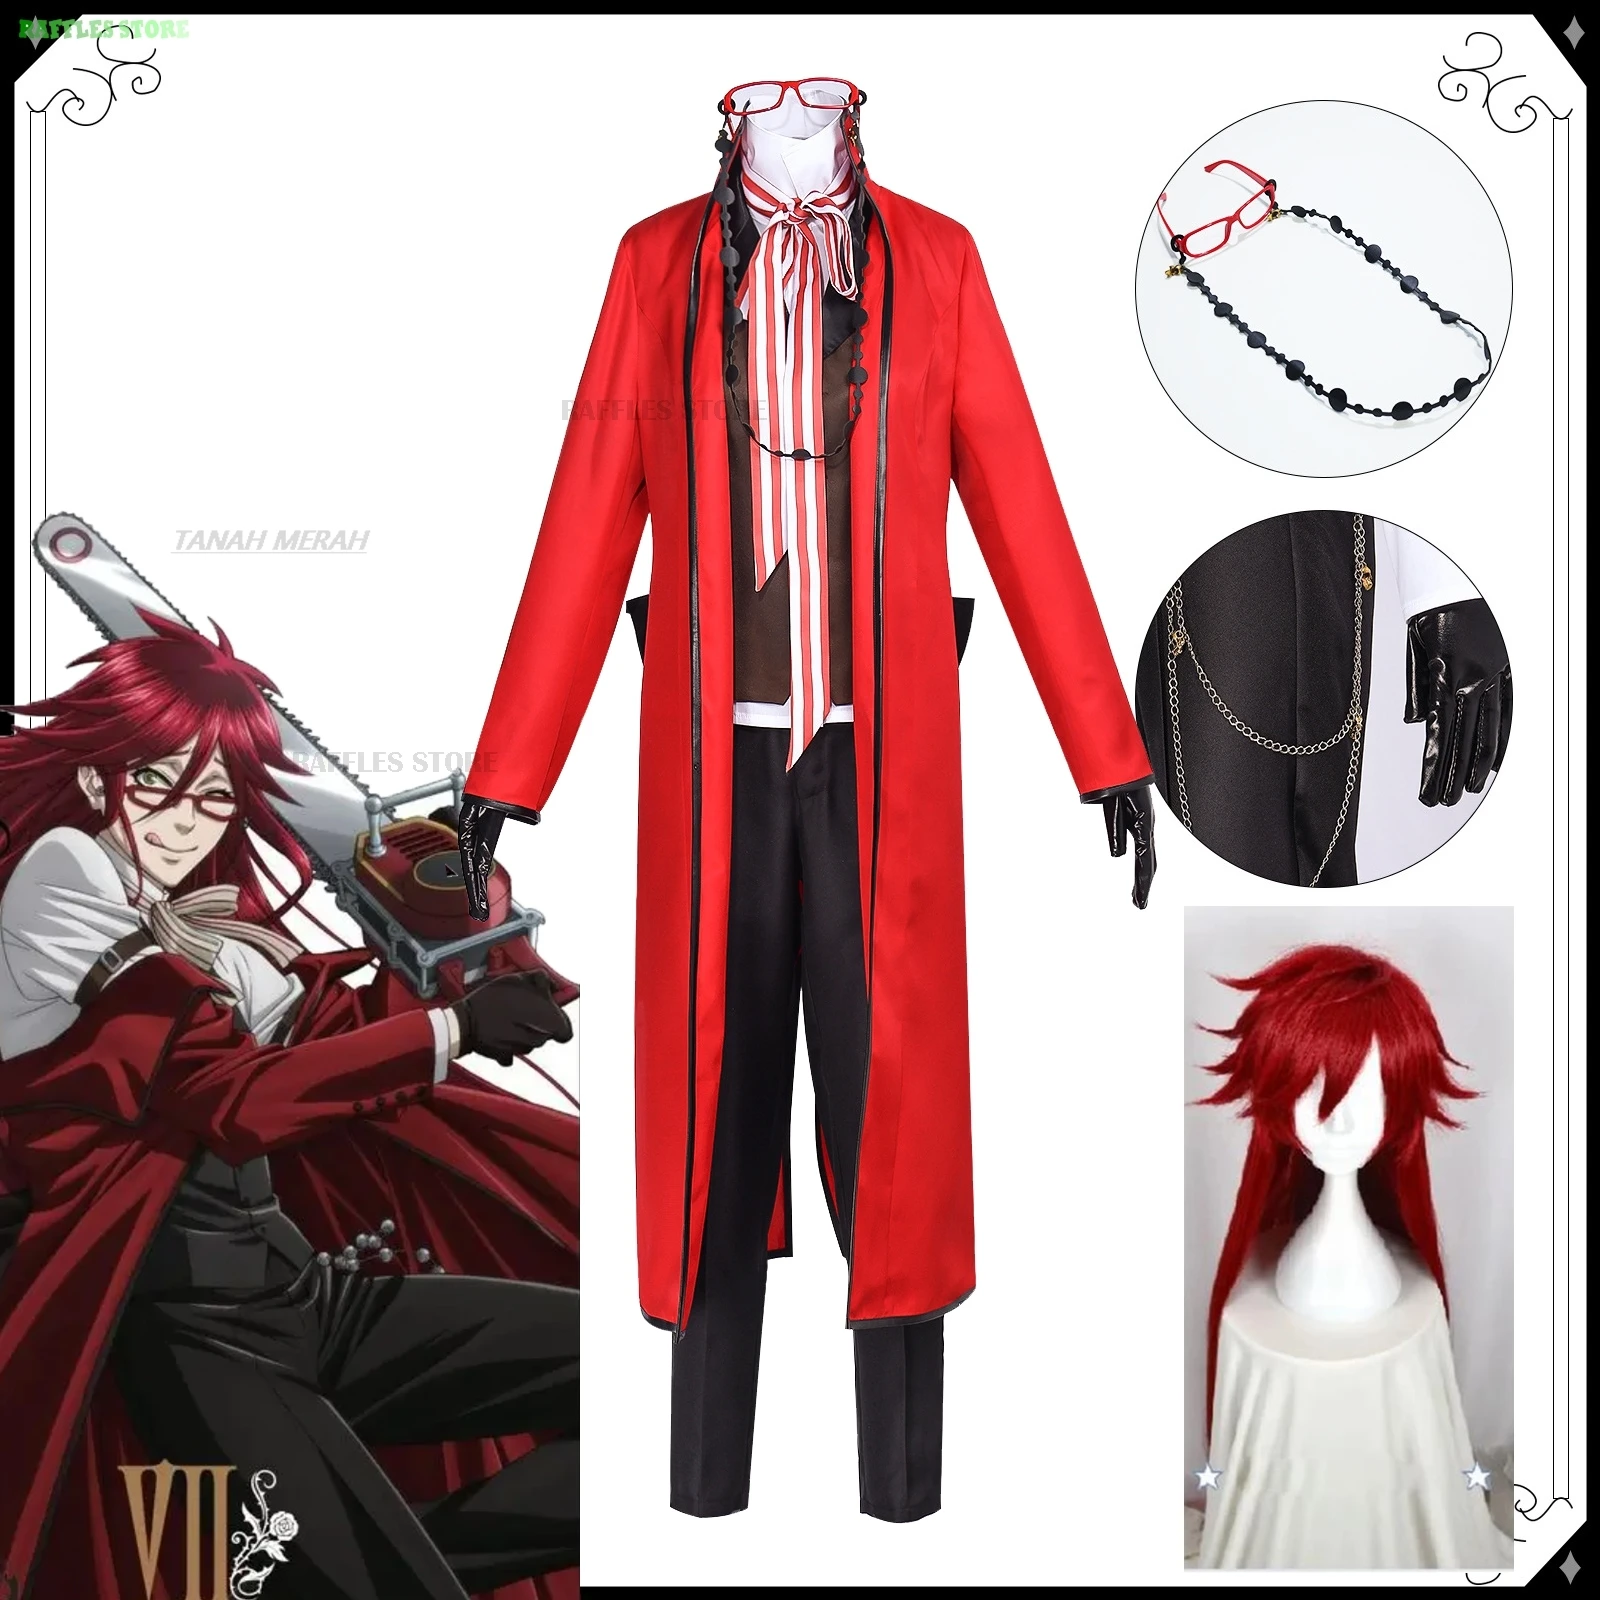 

Black Butler Grell Sutcliff Michaelis Cosplay Costume Wig Uniforms Anime Cosplay Halloween Party Unisex Fancy Red Suit Glasses